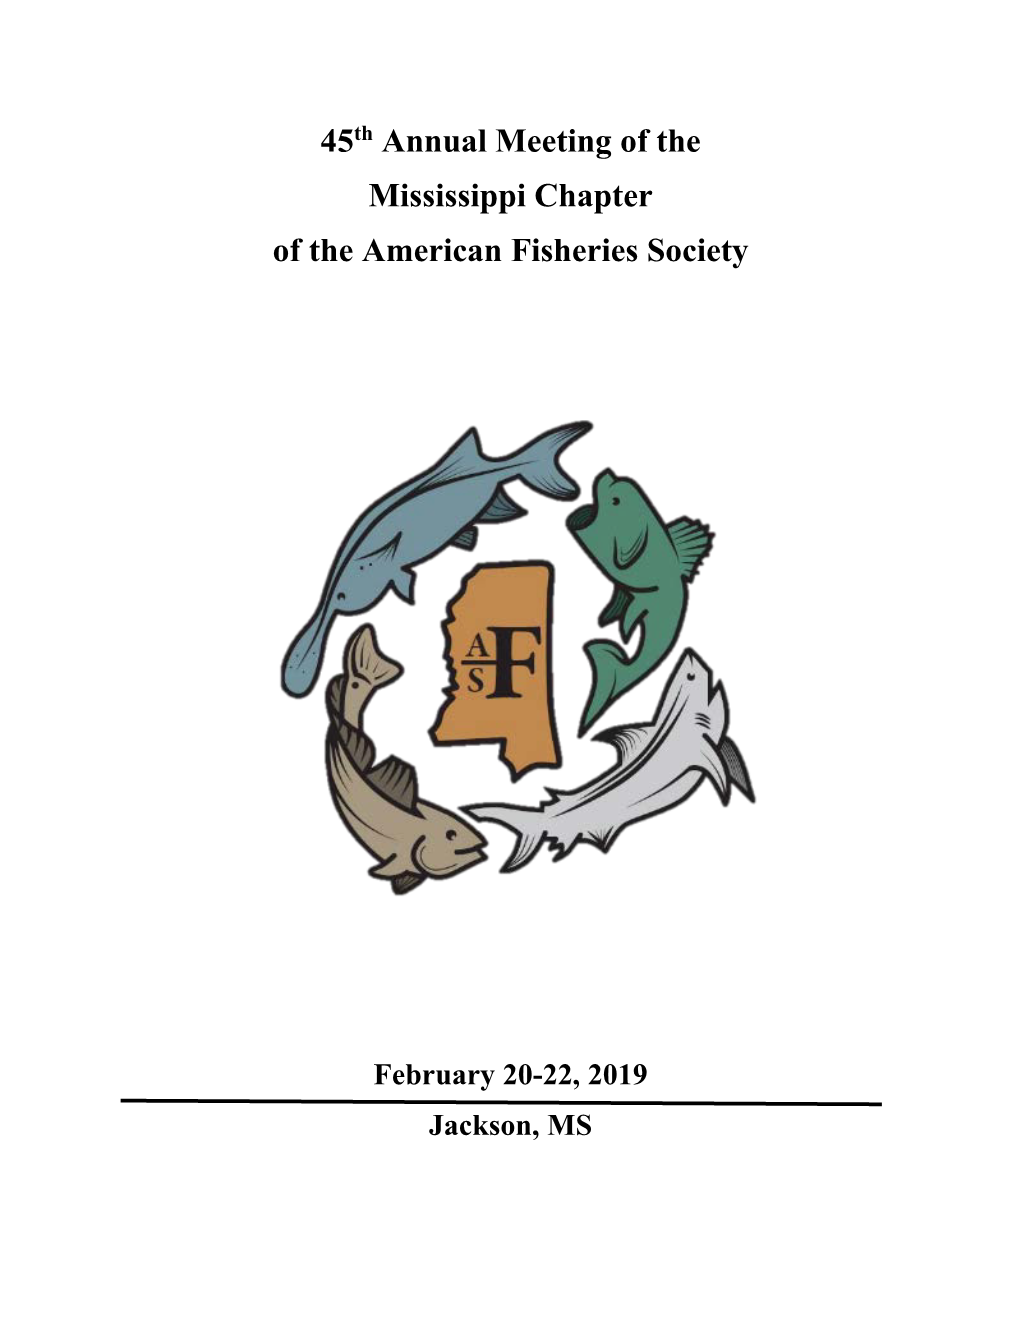 45Th Annual Meeting of the Mississippi Chapter of the American Fisheries Society